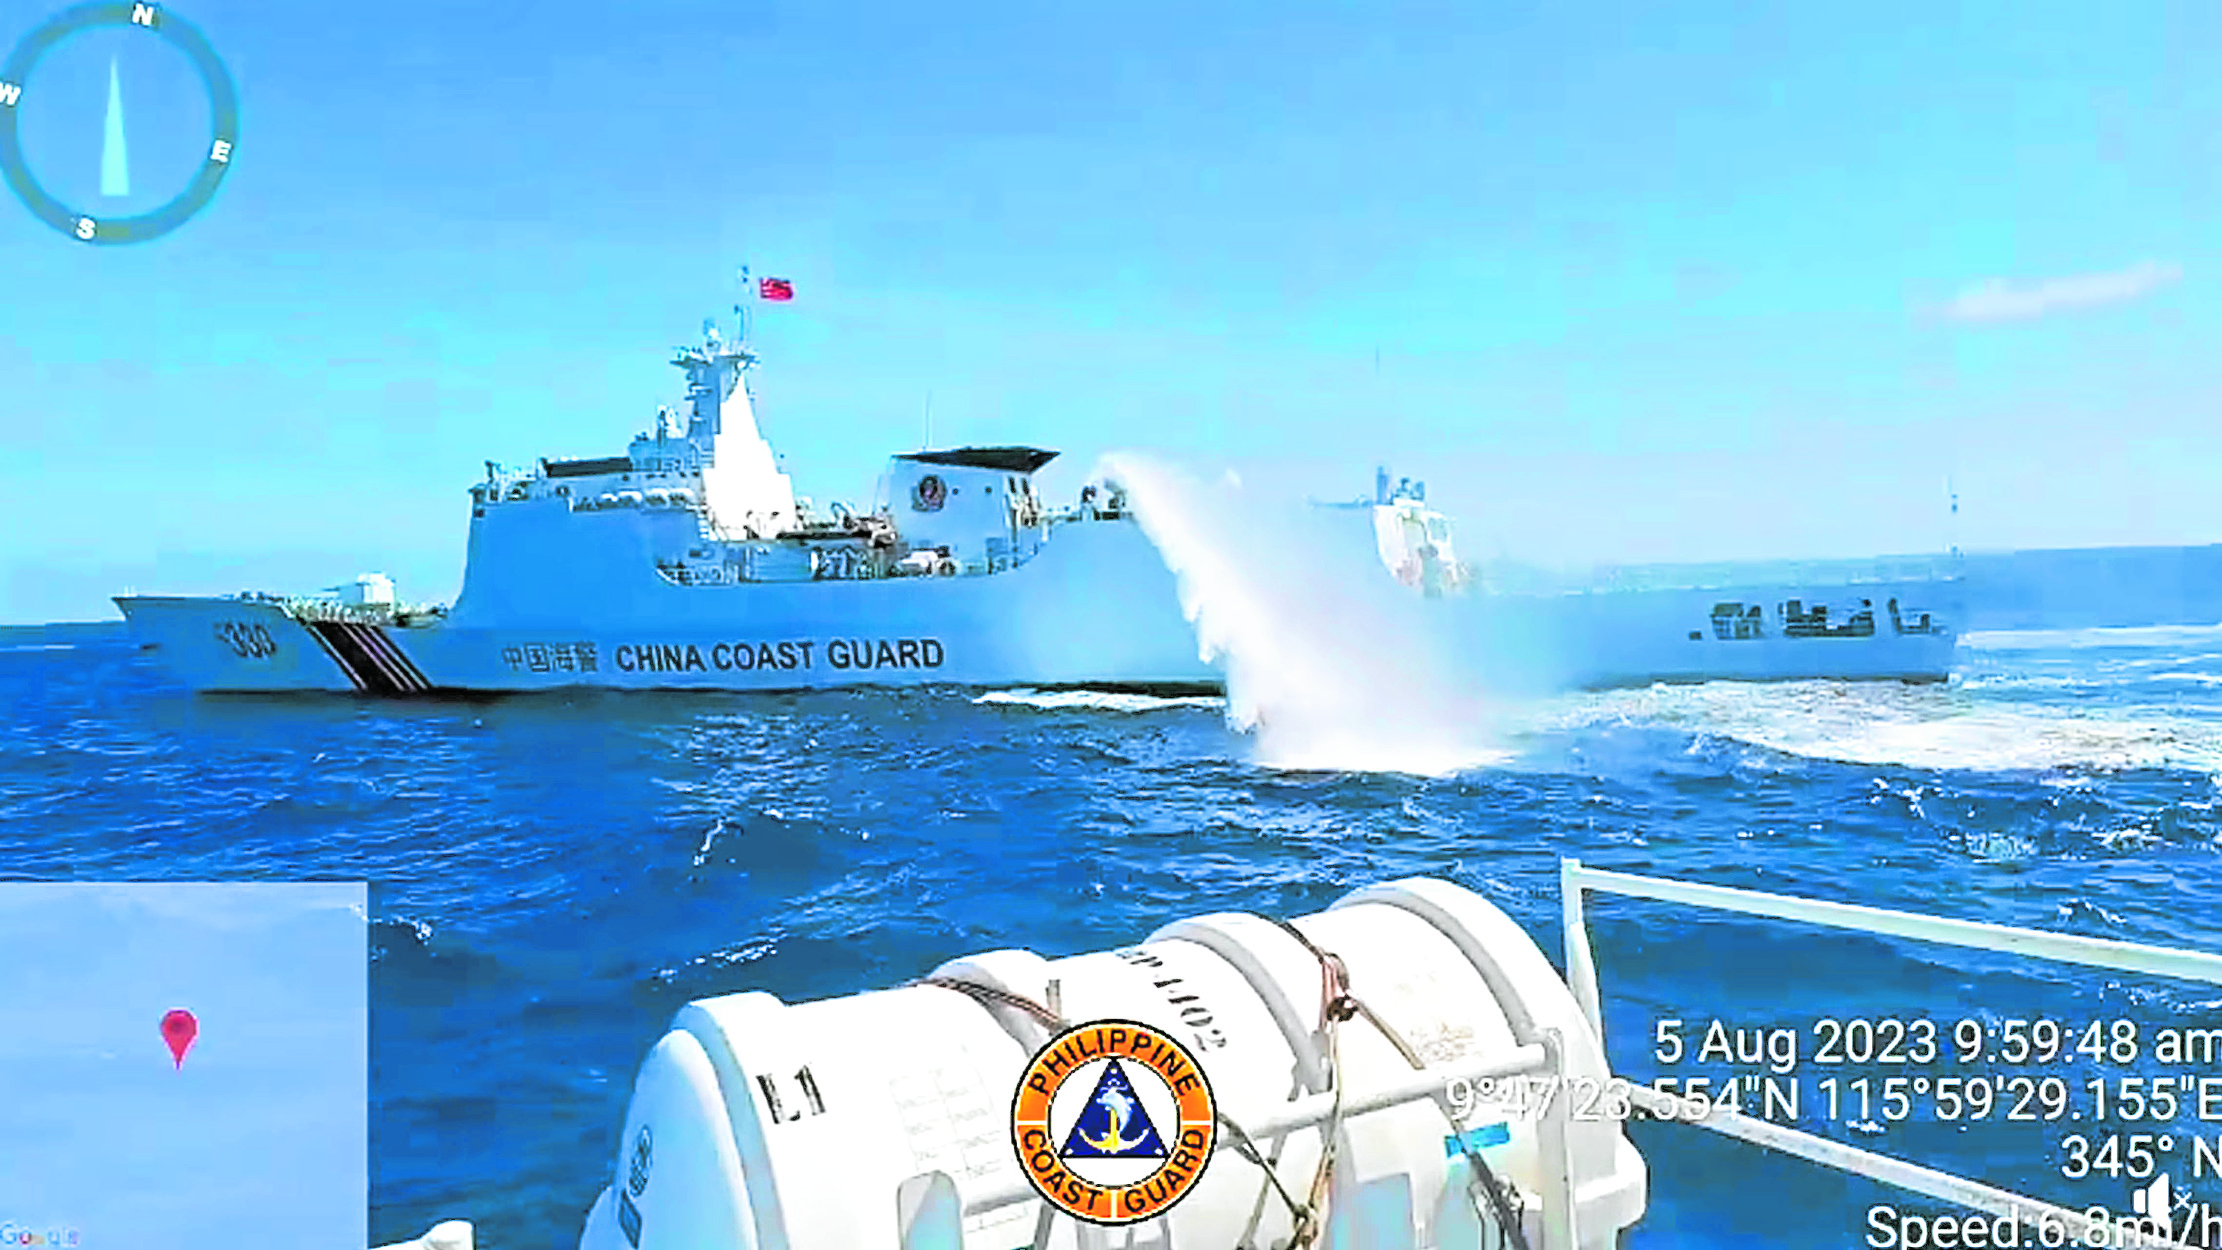 Malacañang on Wednesday issued a short but curt response to China’s claim that the Philippines promised to remove the BRP Sierra Madre from Ayungin Shoal.